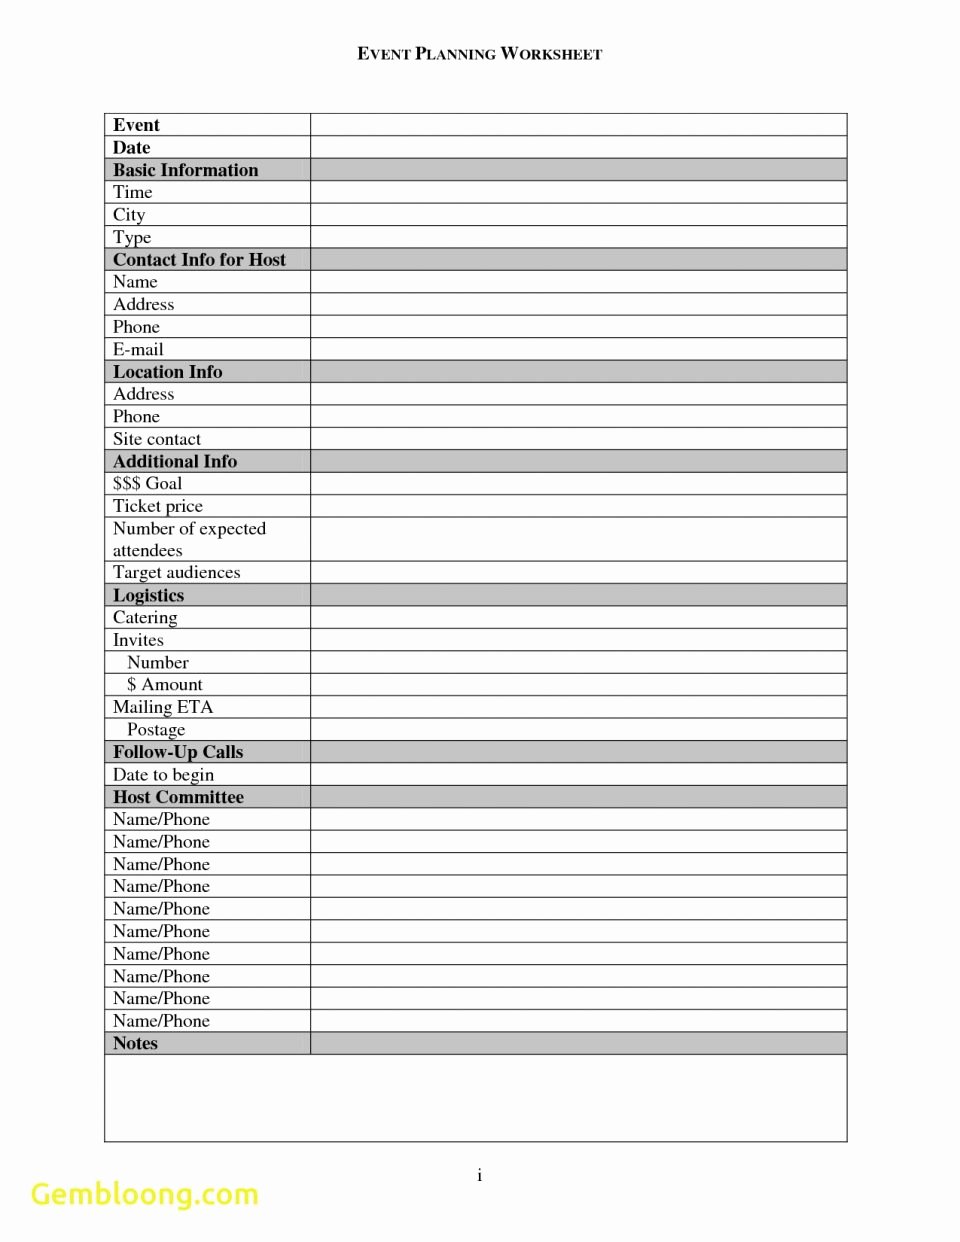 Corporate event Planning Template Beautiful Bud Worksheet event Planner Free Planning Simple